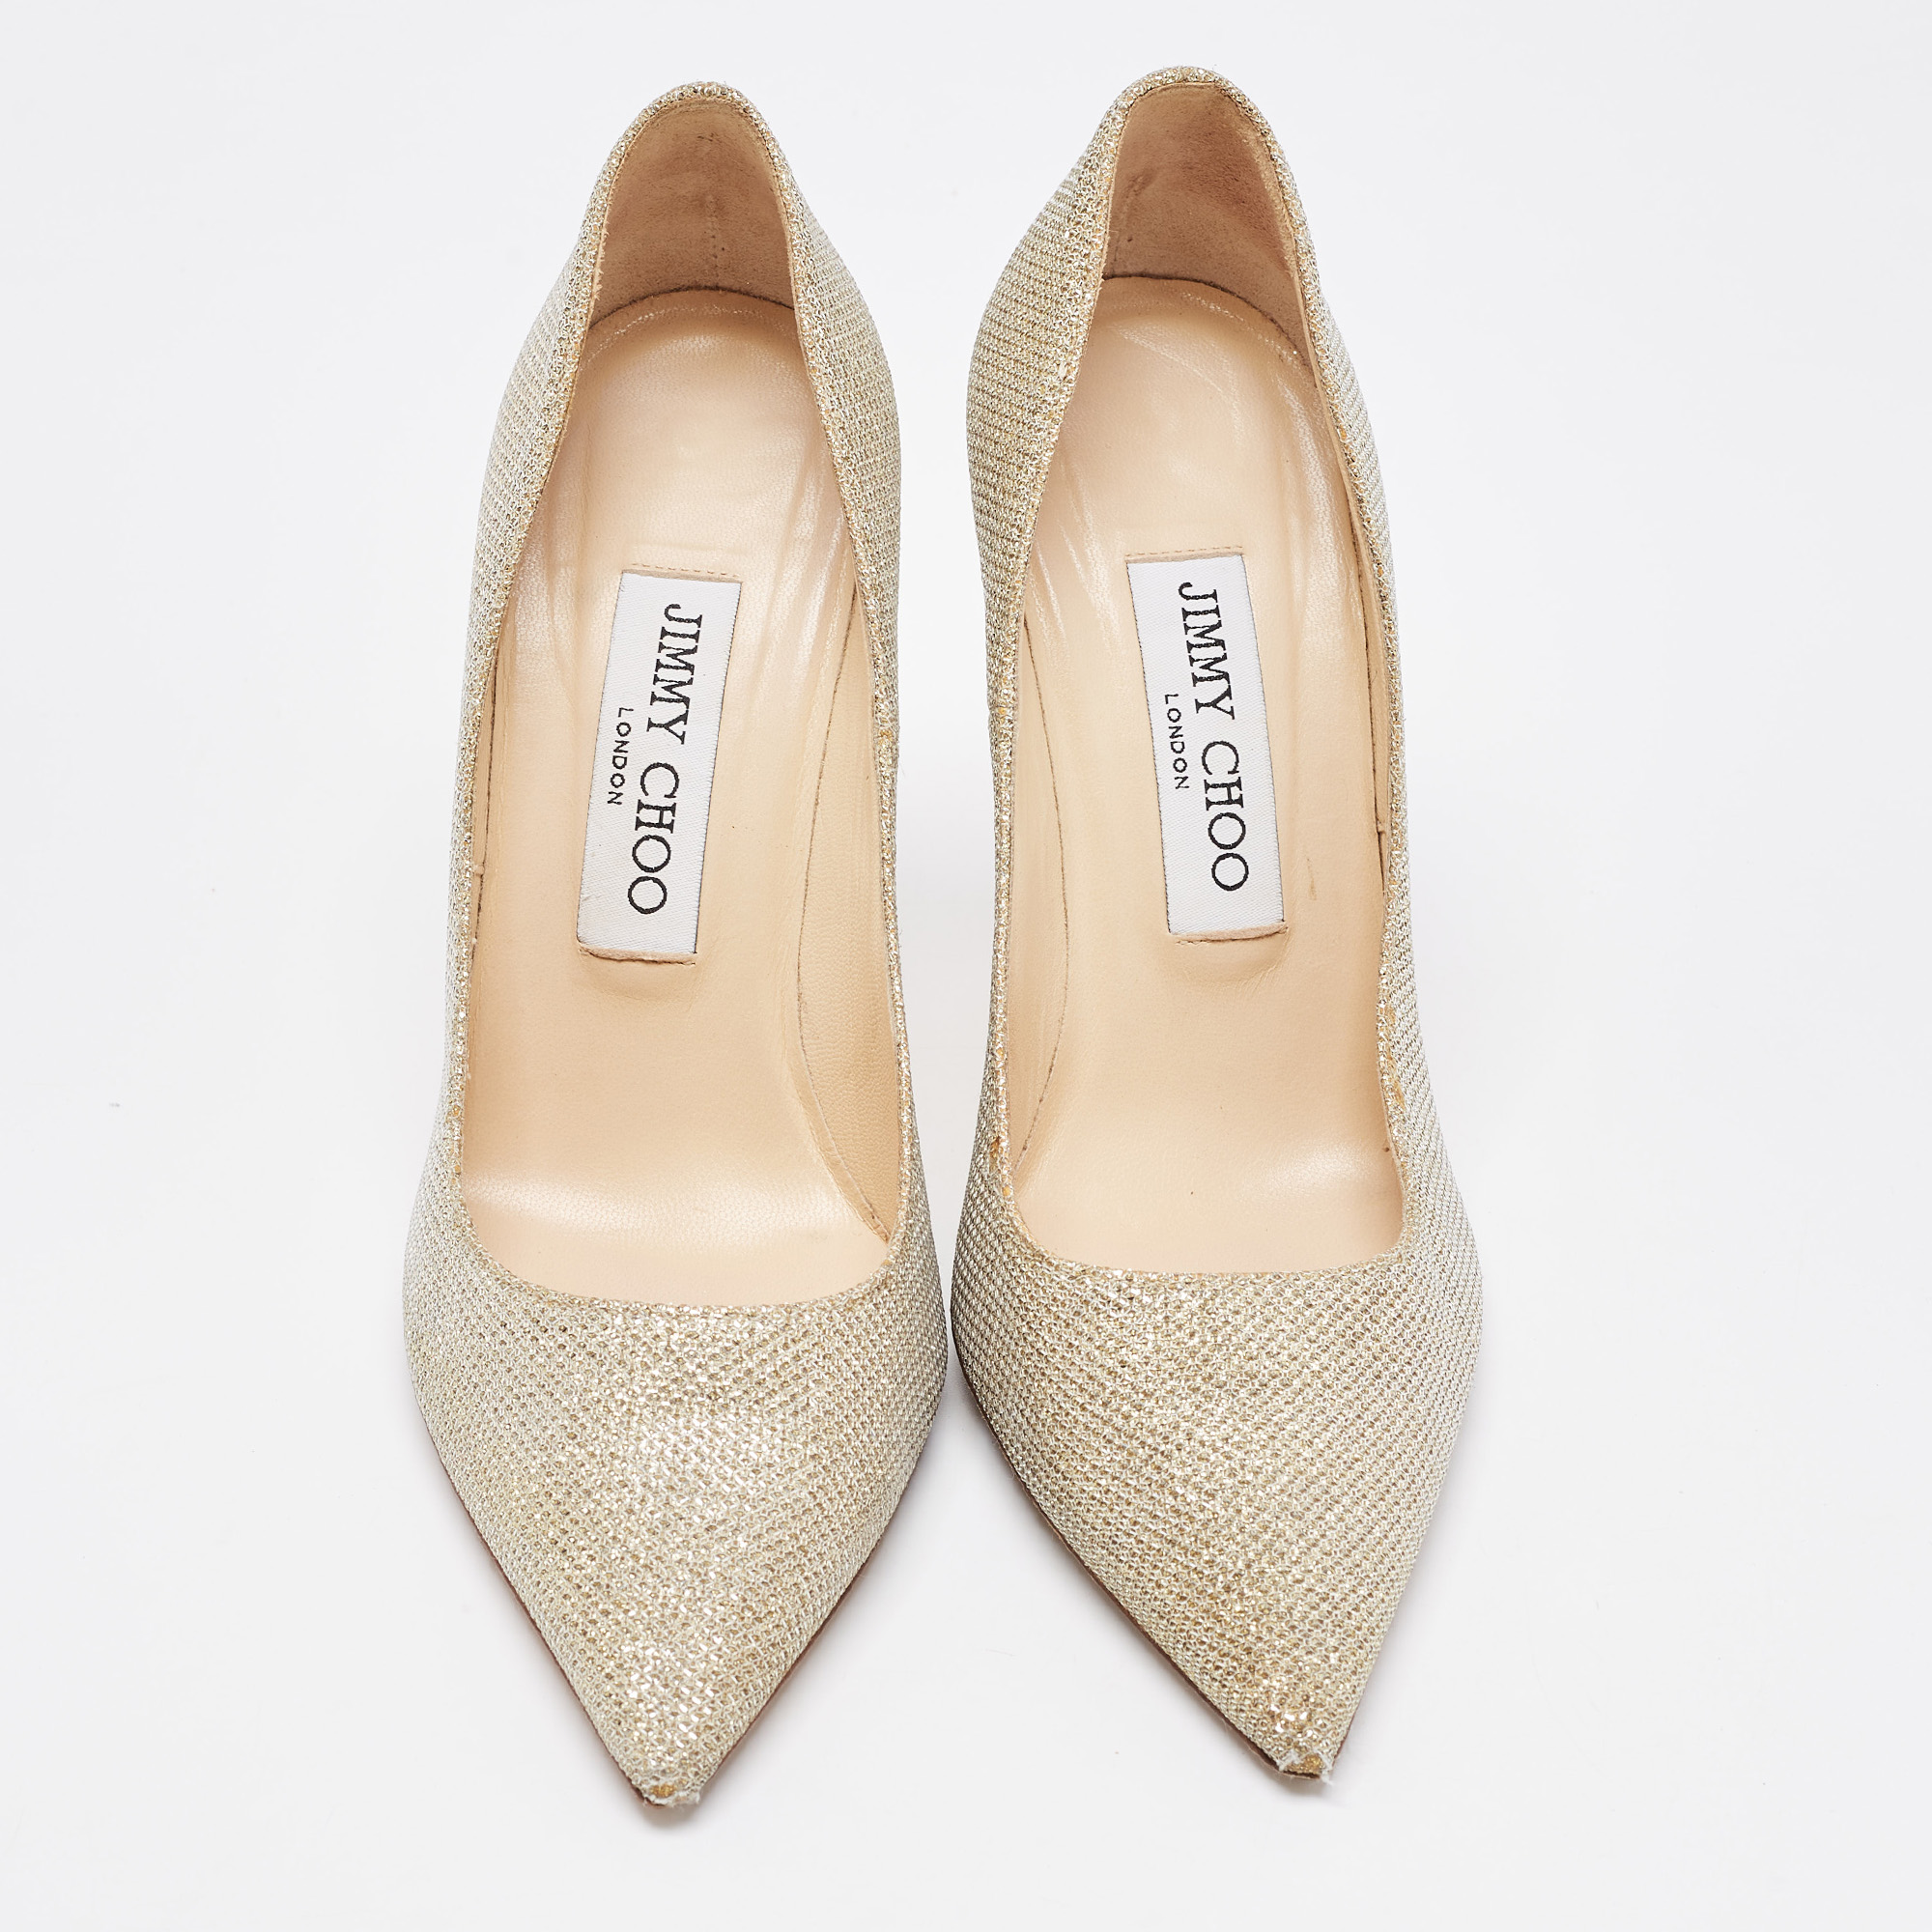 Jimmy Choo Gold Glitter Romy Pointed Toe Pumps Size 36